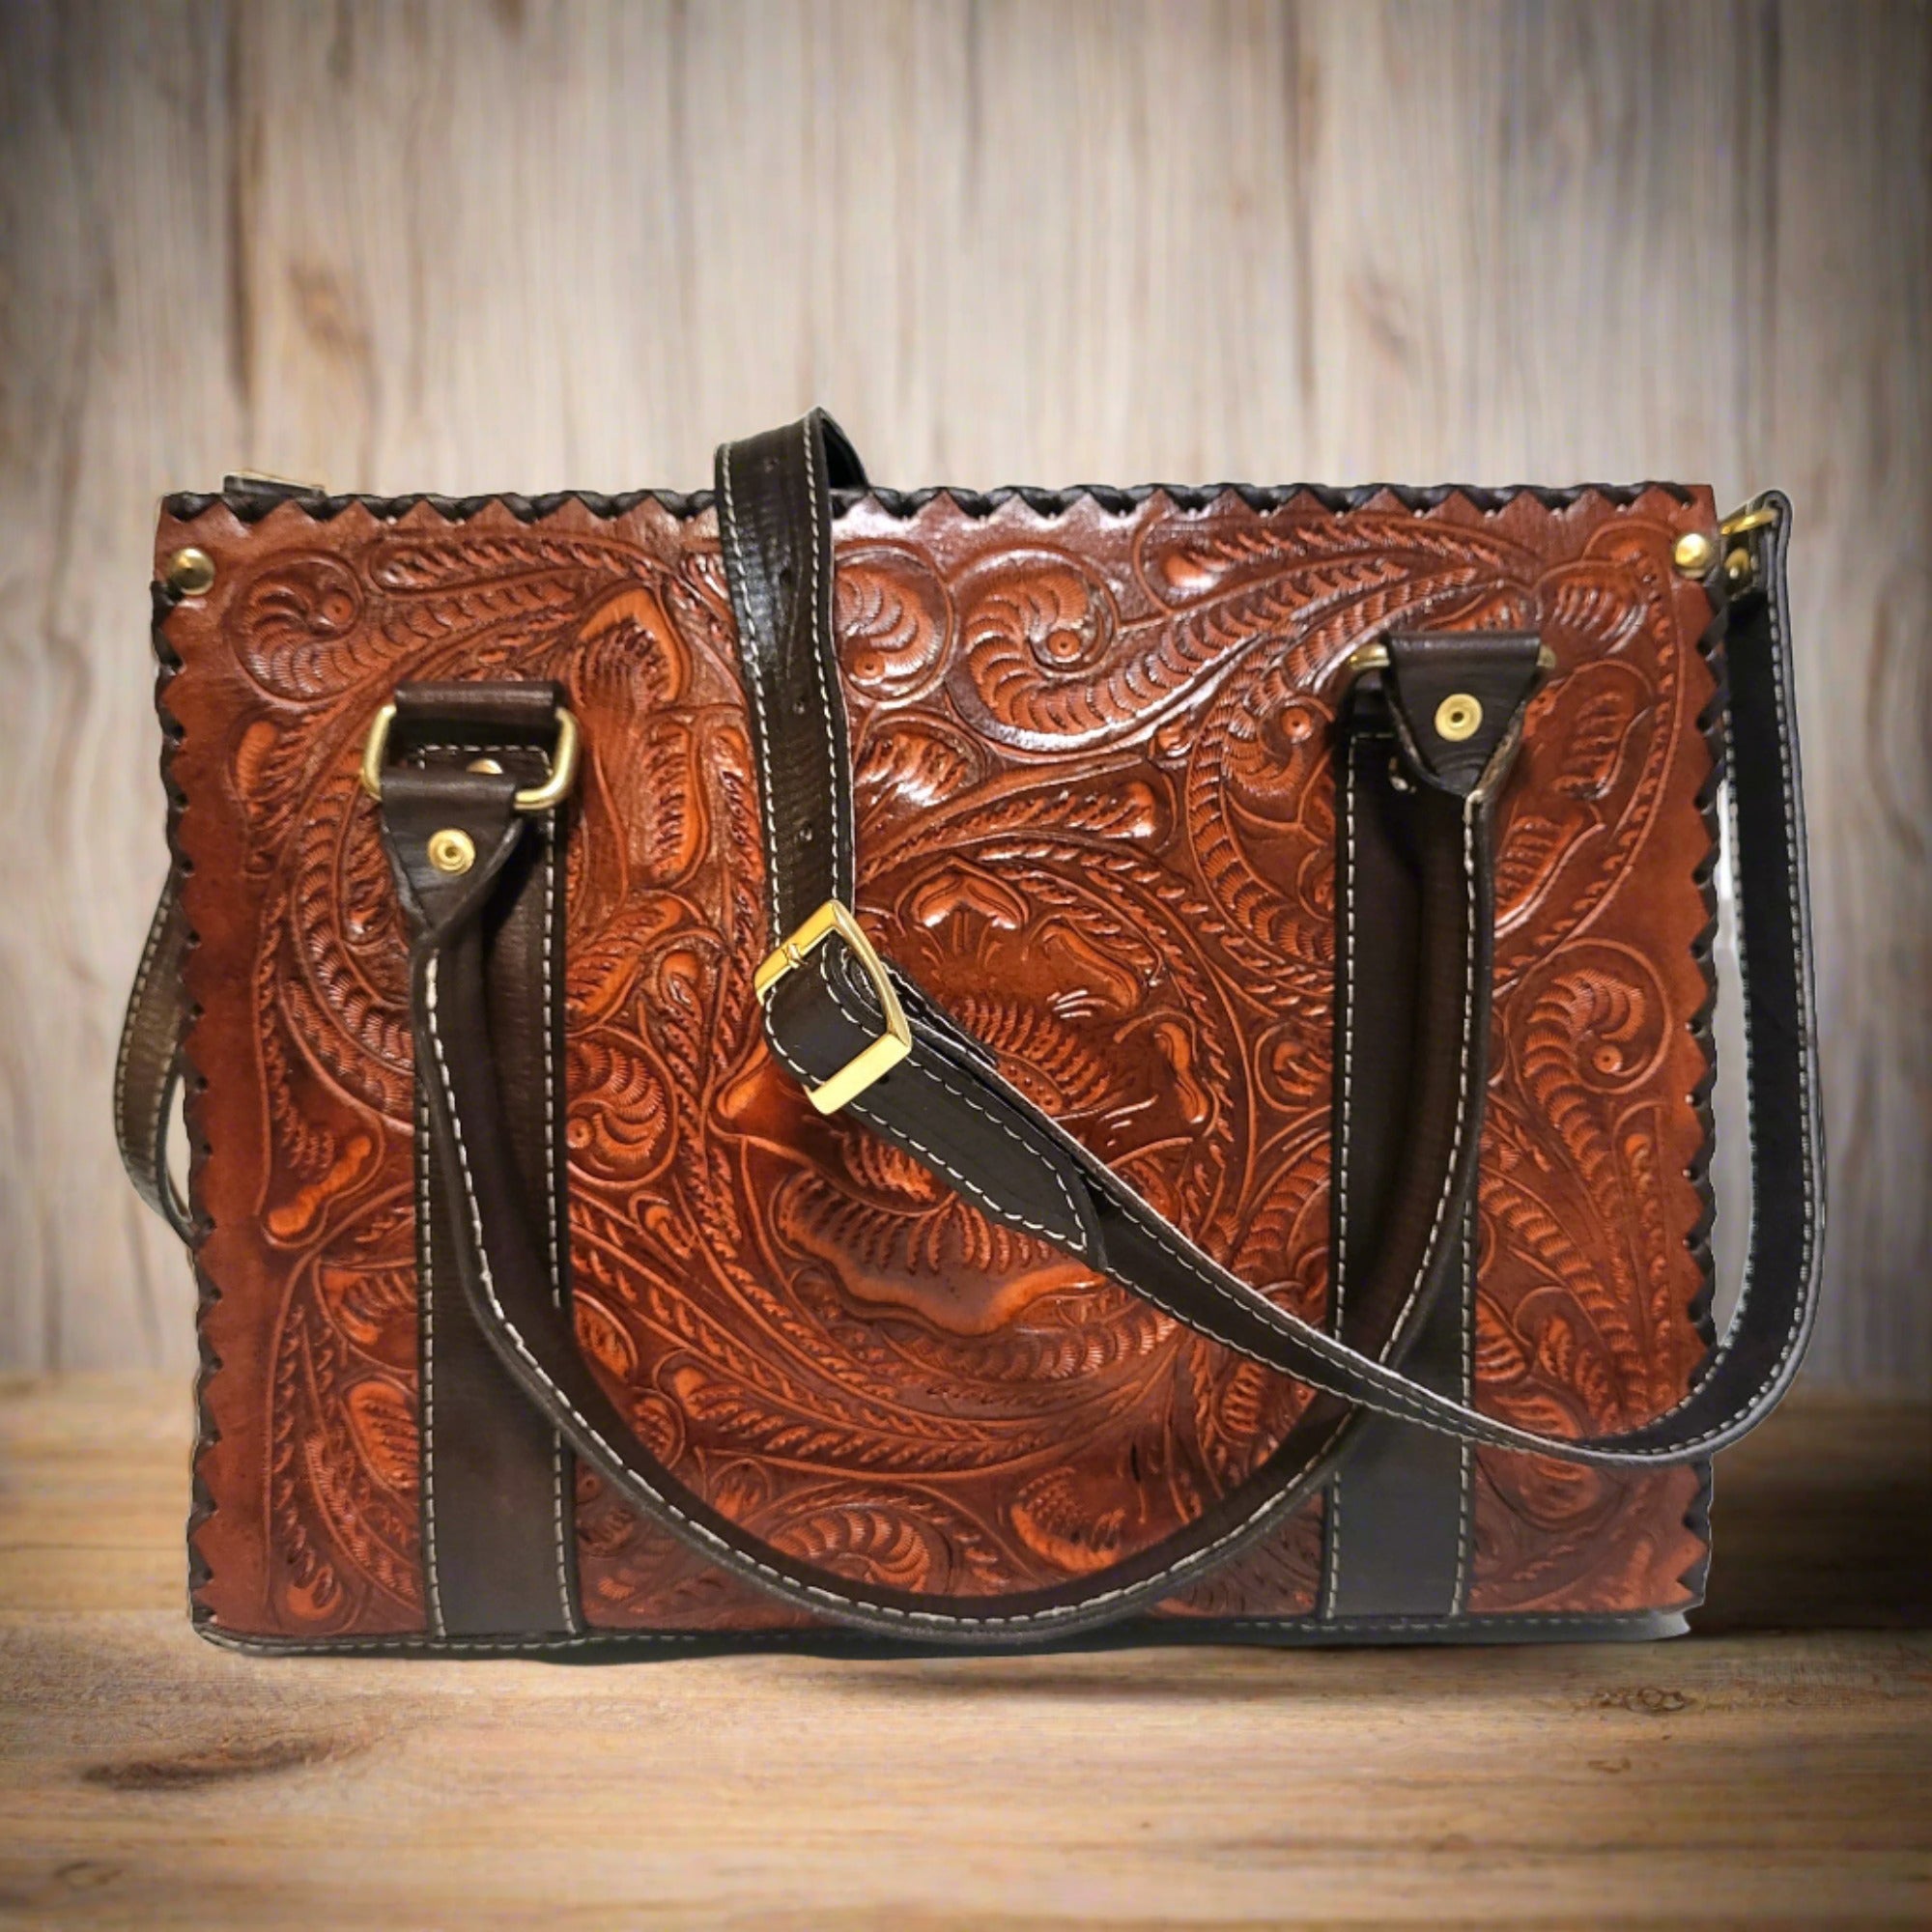 Leather handbag for women hand tooled leather bag handmade,  hand tooled leather bag.